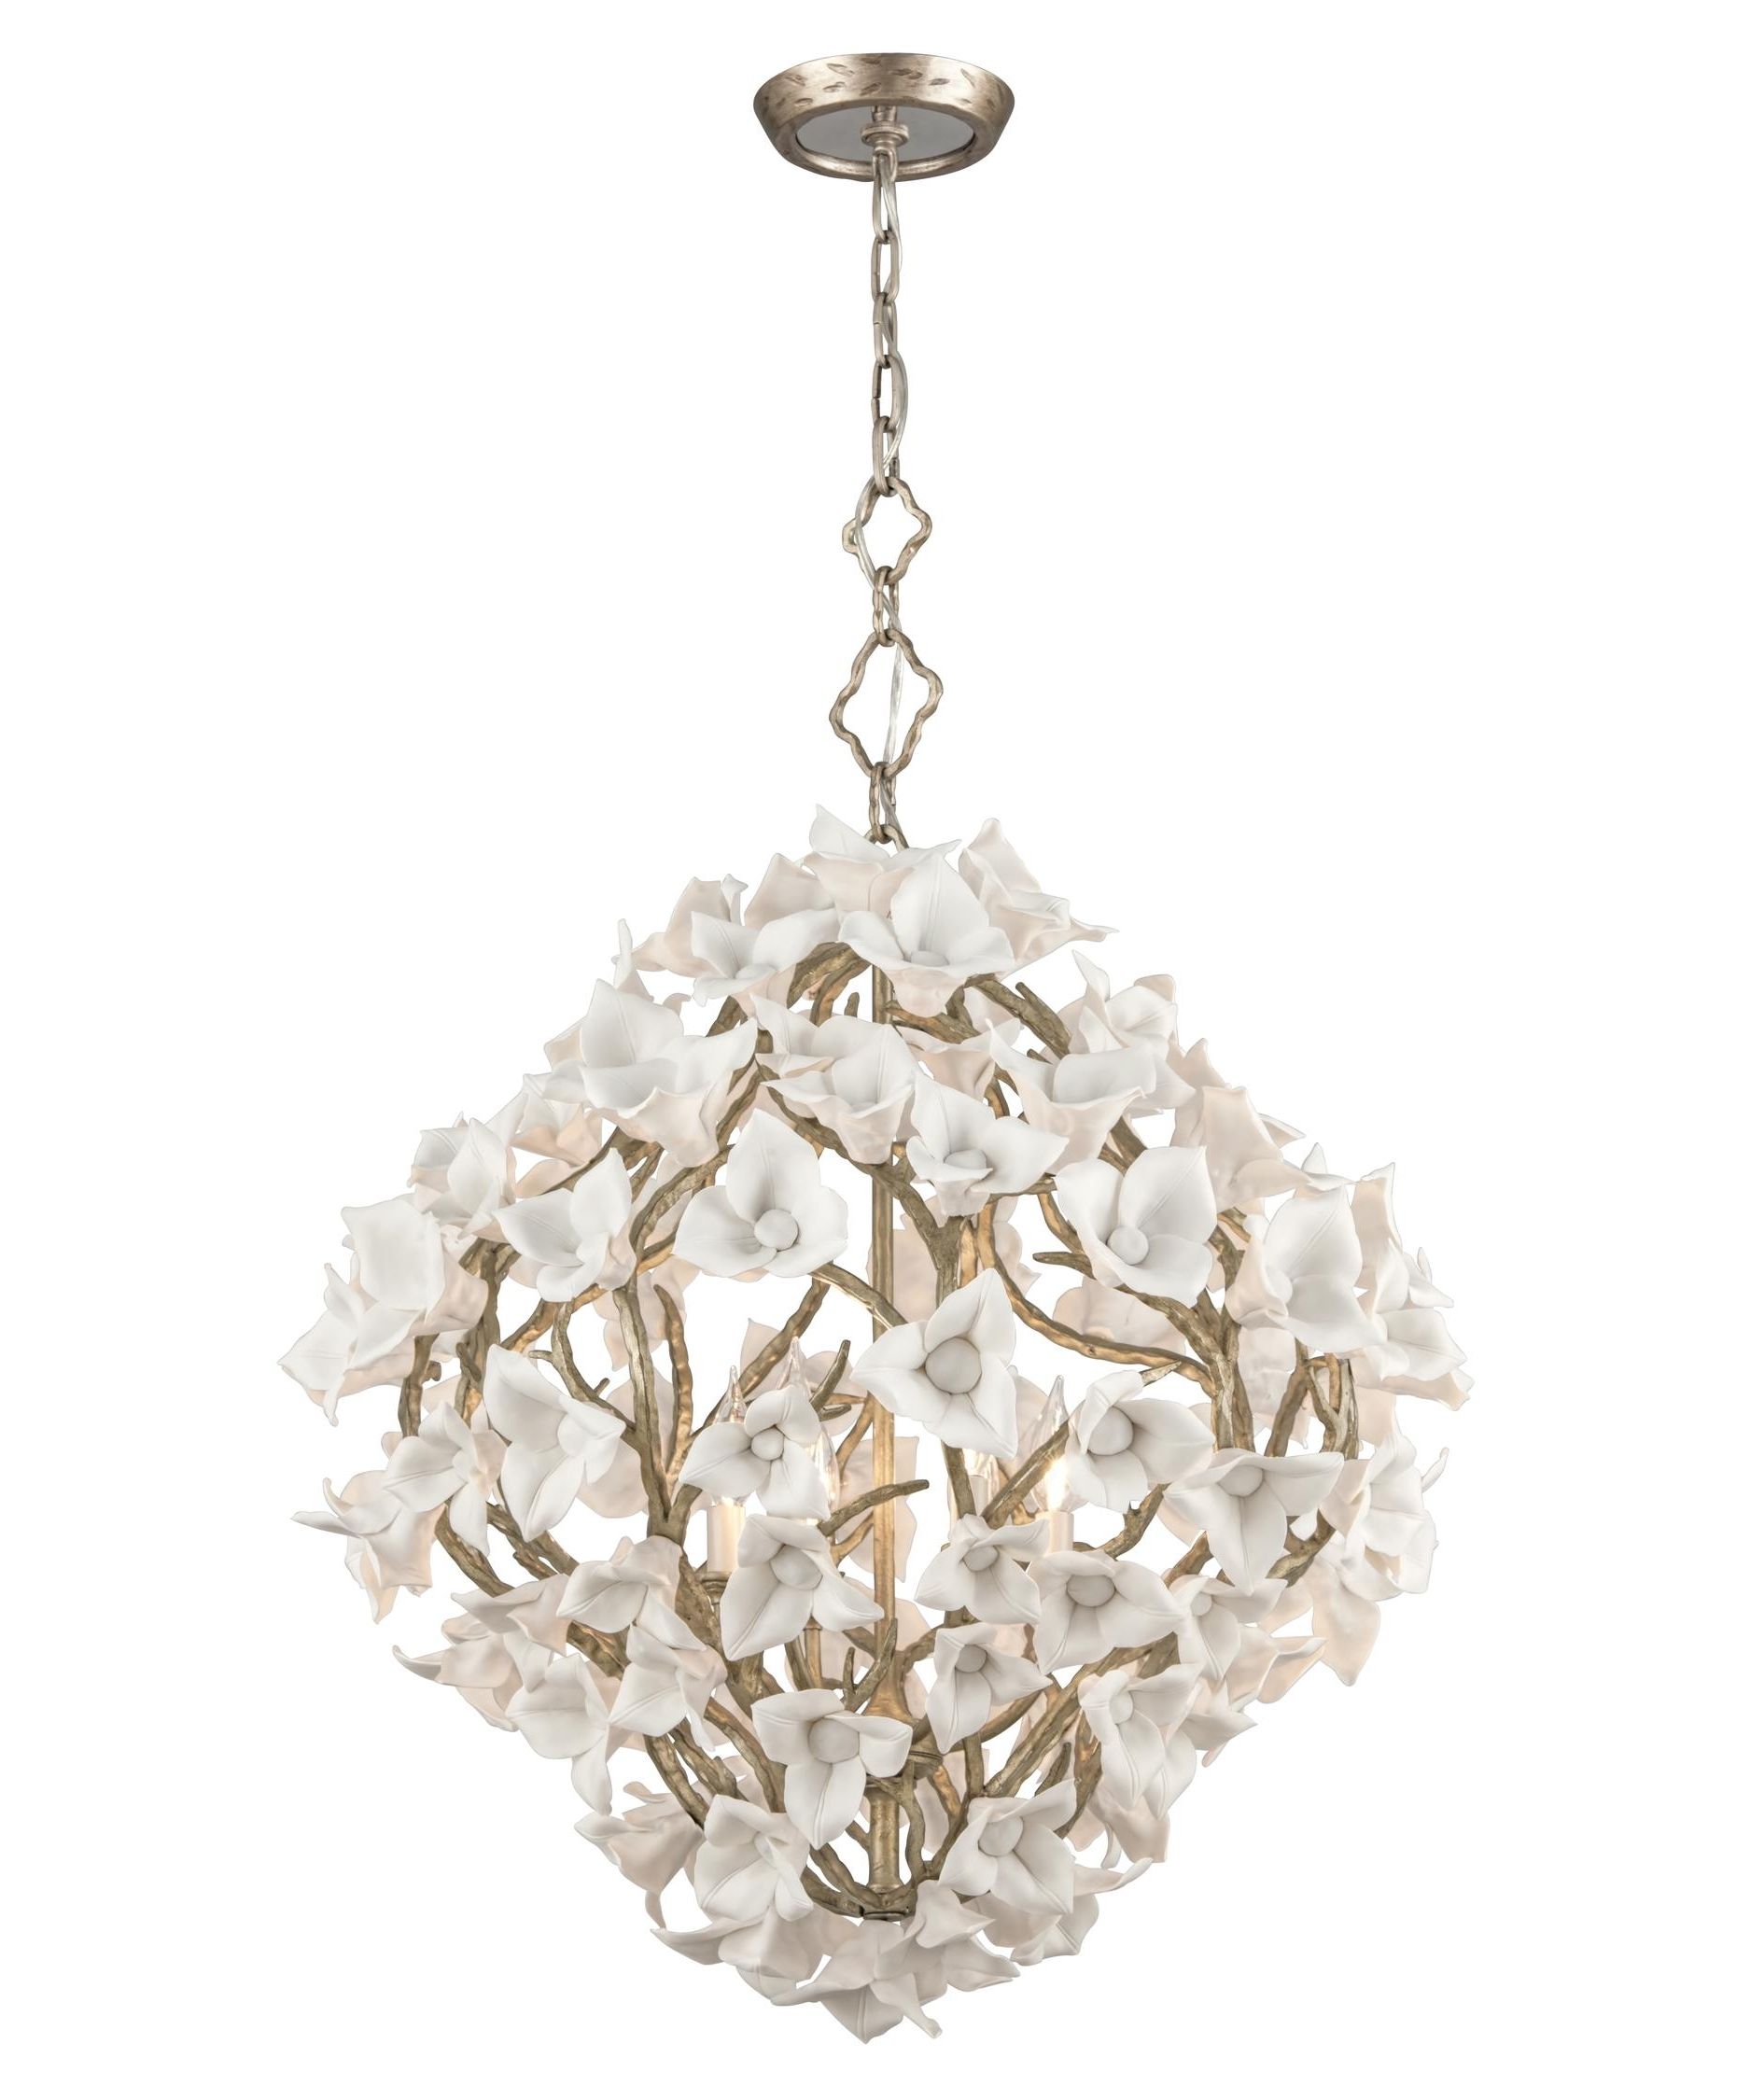 Widely Used Corbett Lighting 211 46 Lily 26 Inch Wide 6 Light Large Pendant Intended For Lily Chandeliers (View 4 of 15)